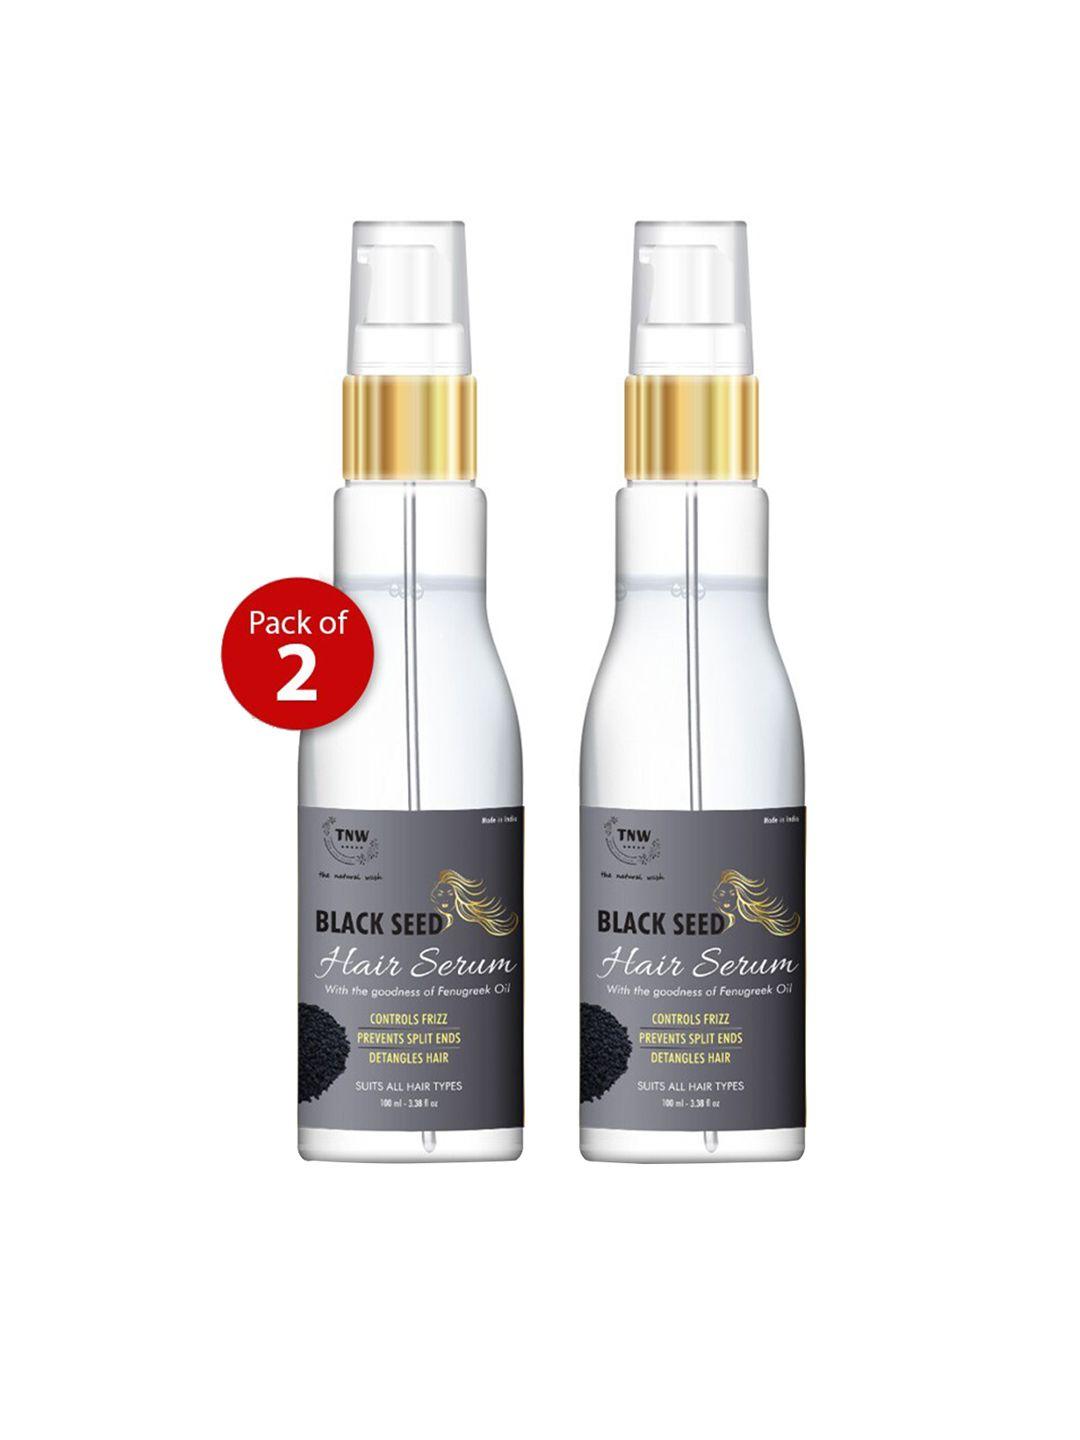 tnw the natural wash set of 2 black seed hair serum with fenugreek oil - 100 ml each